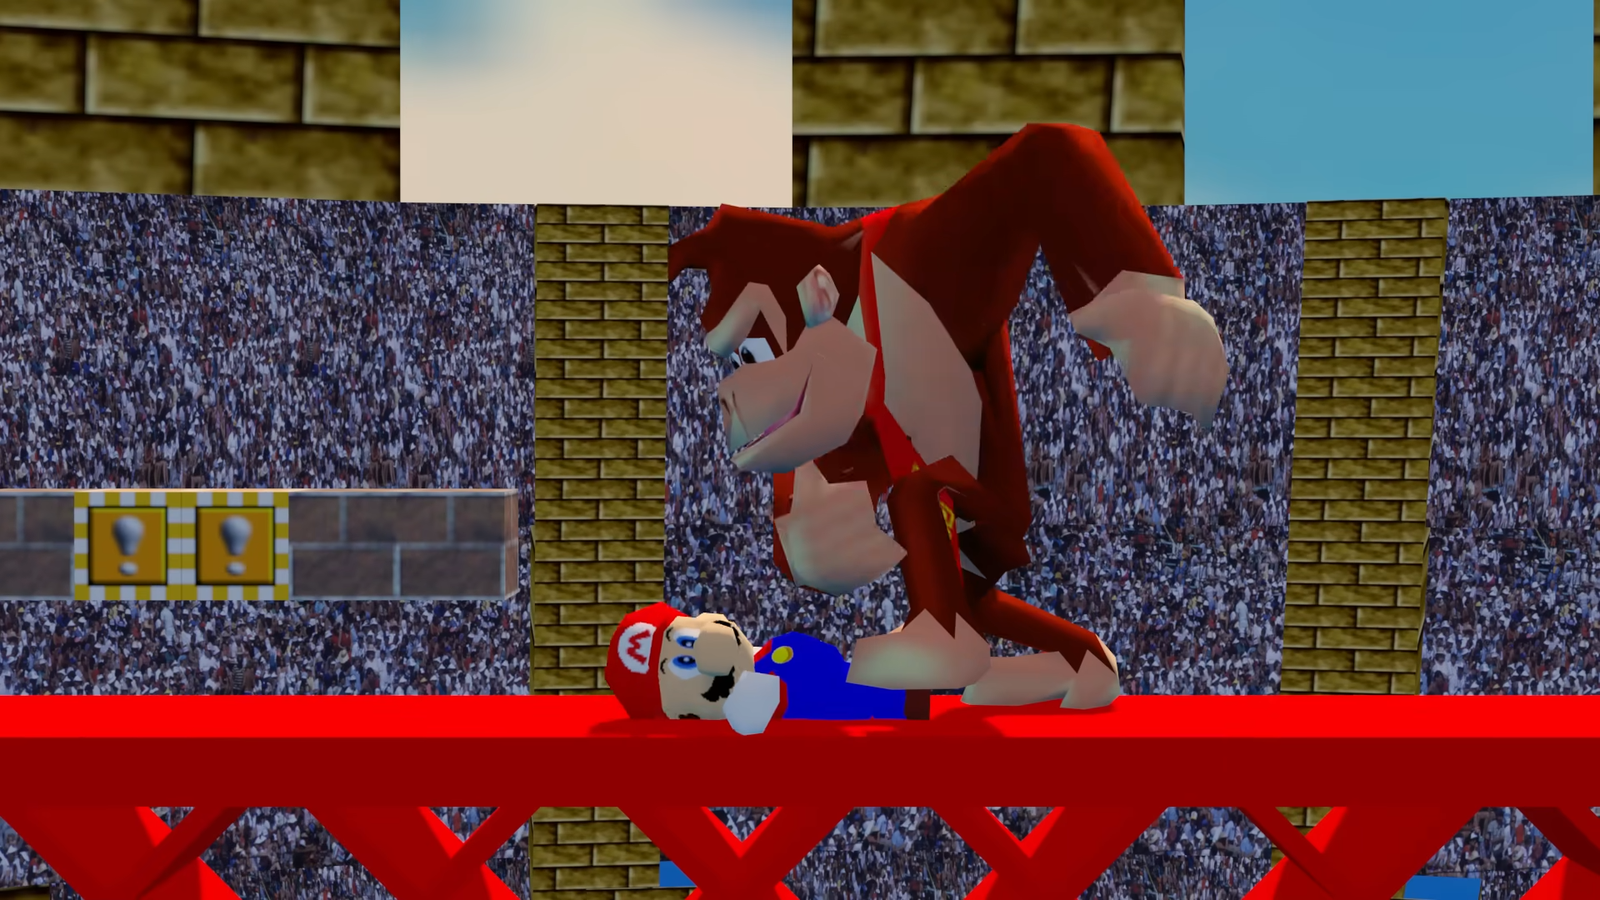 Play Super Mario 64 for Free Online in Browser